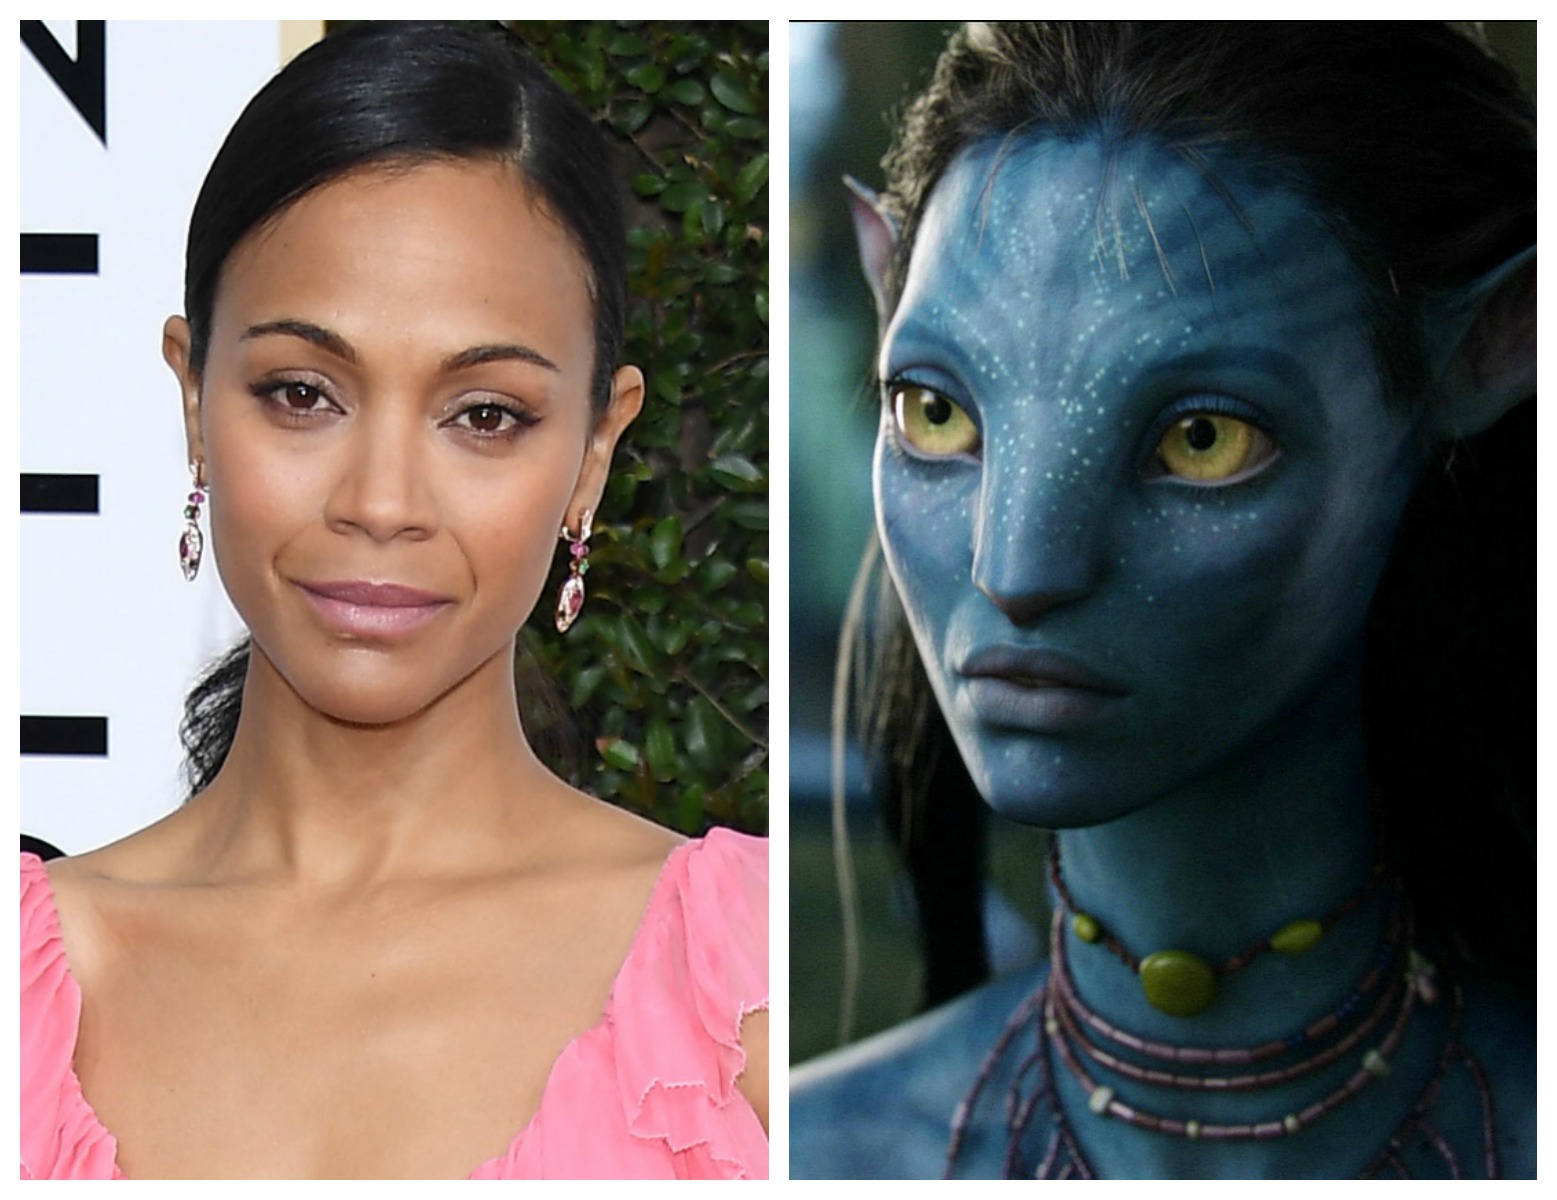 Avatar The Way of Water Cast Who Voices Ronal Neytiri More Characters   StyleCaster